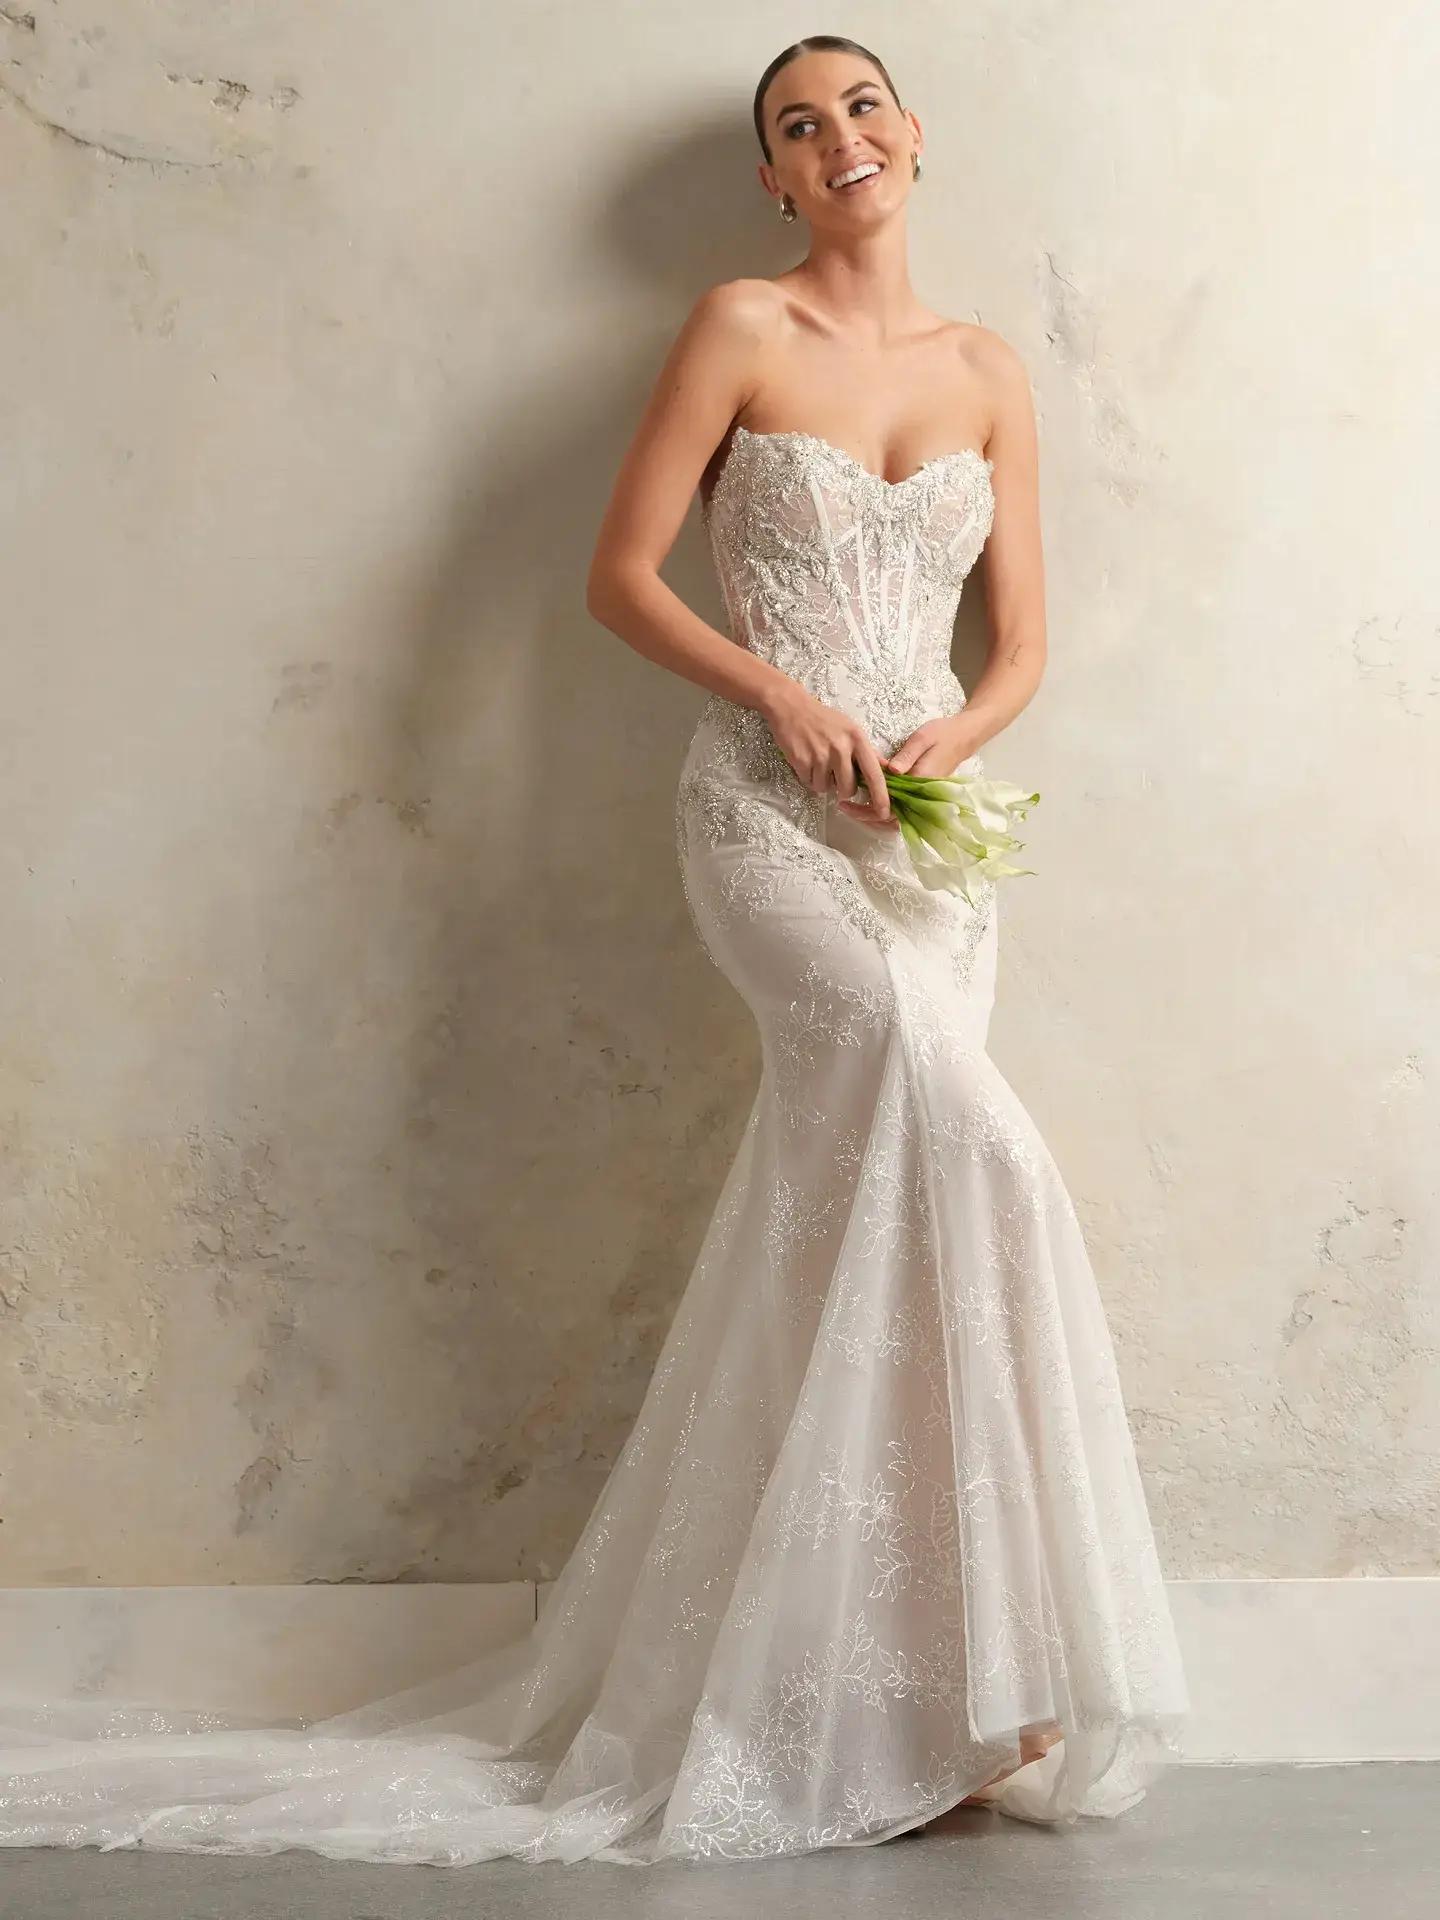 Sottero and Midgley Trunk Show